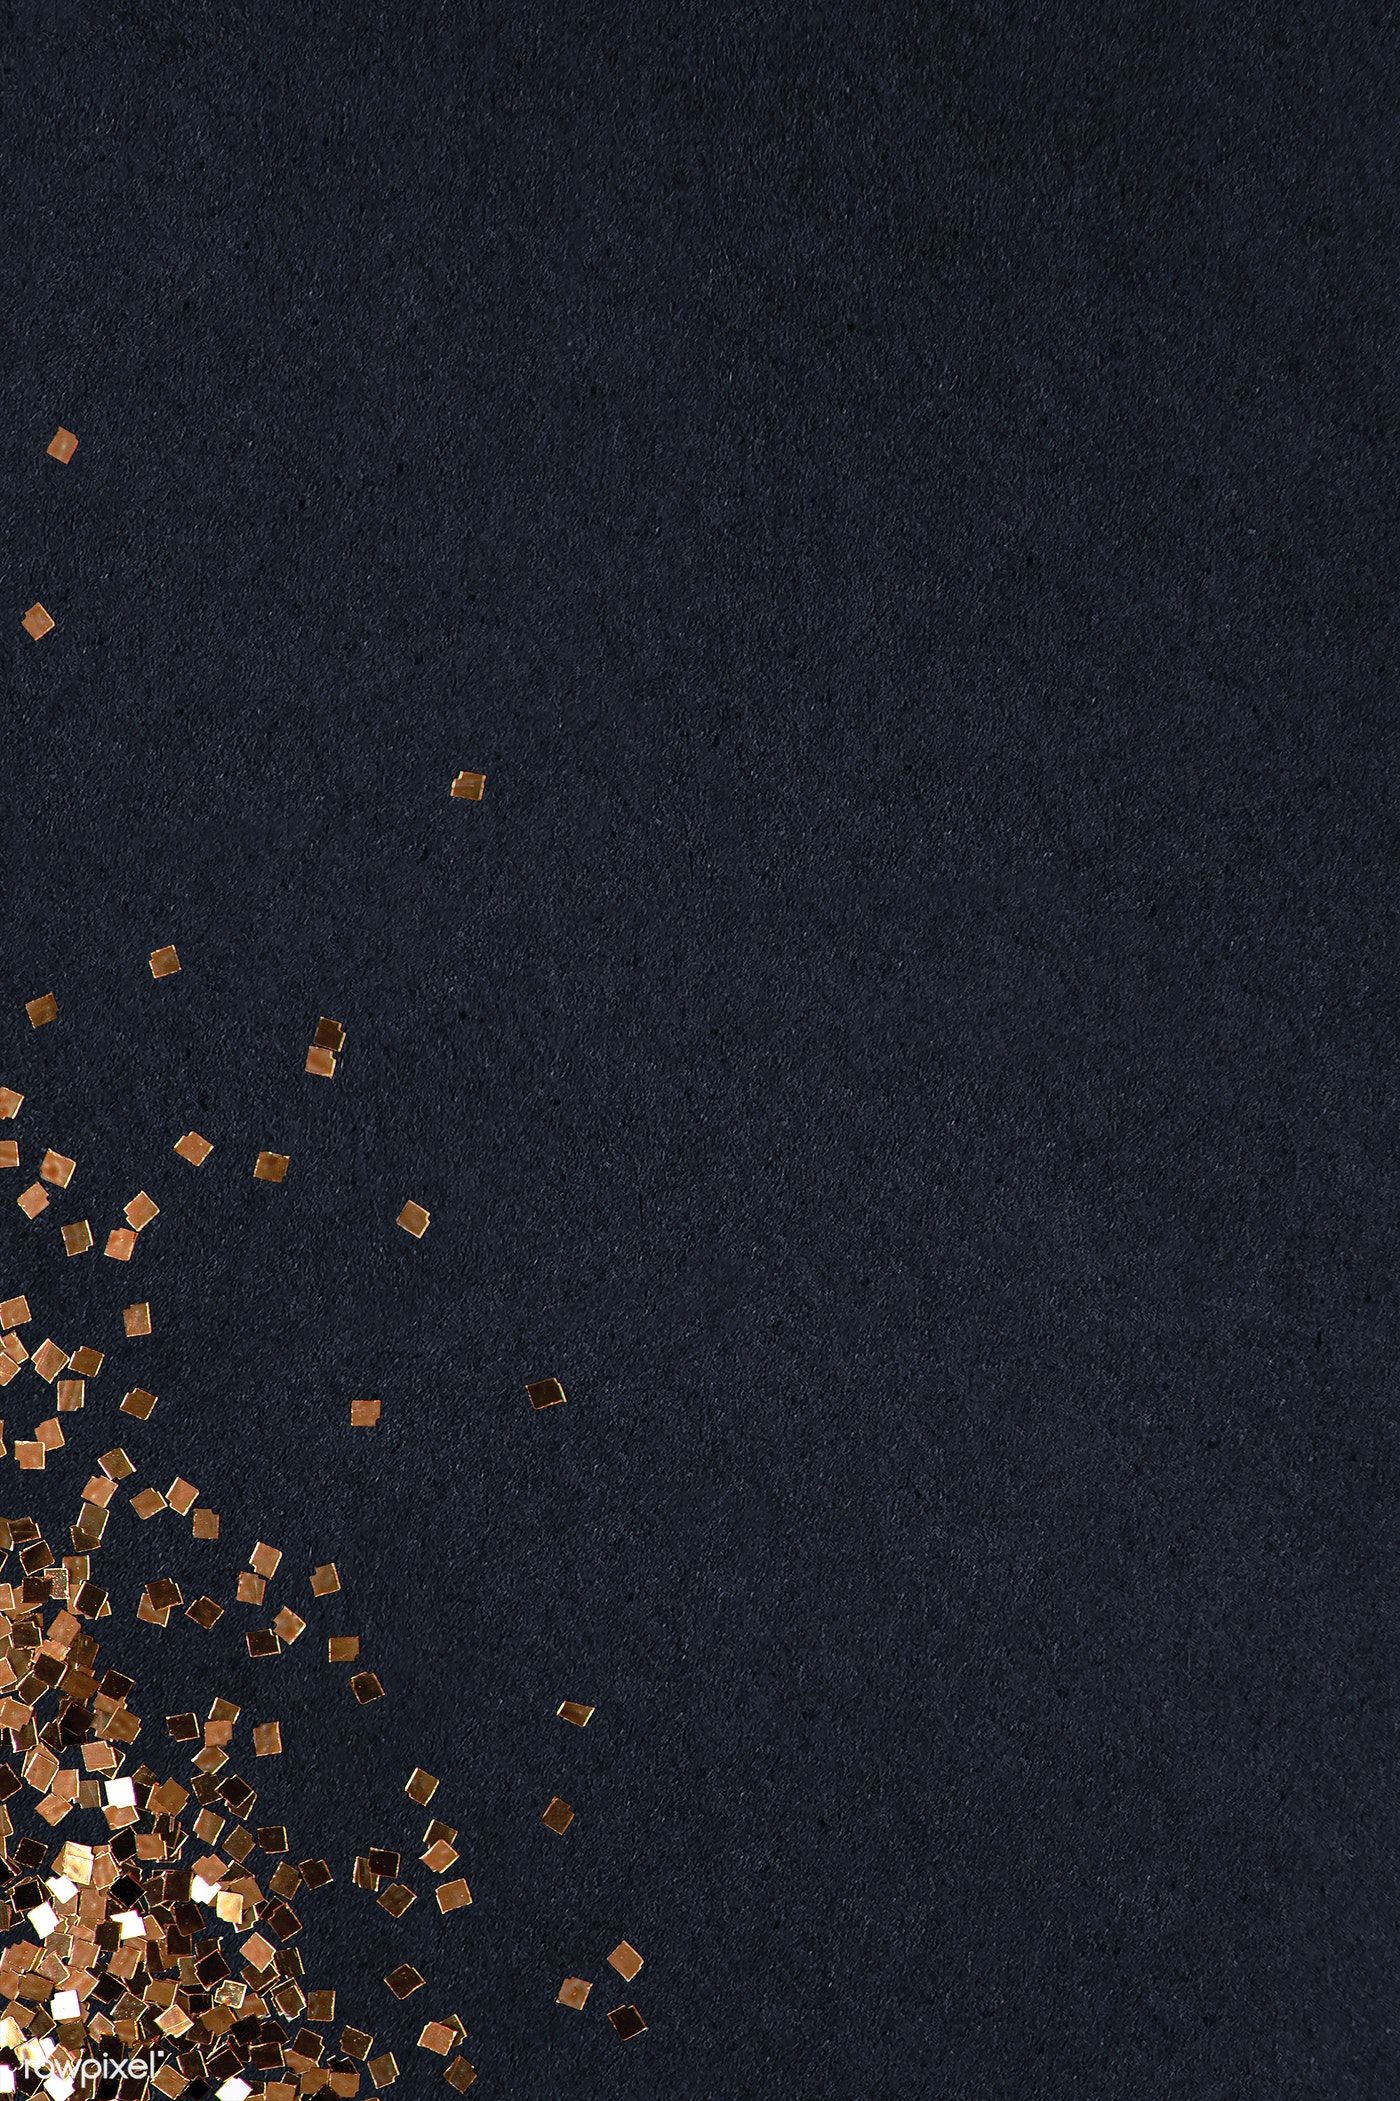 Dusty Gold Particles Pattern Background Illustration Image